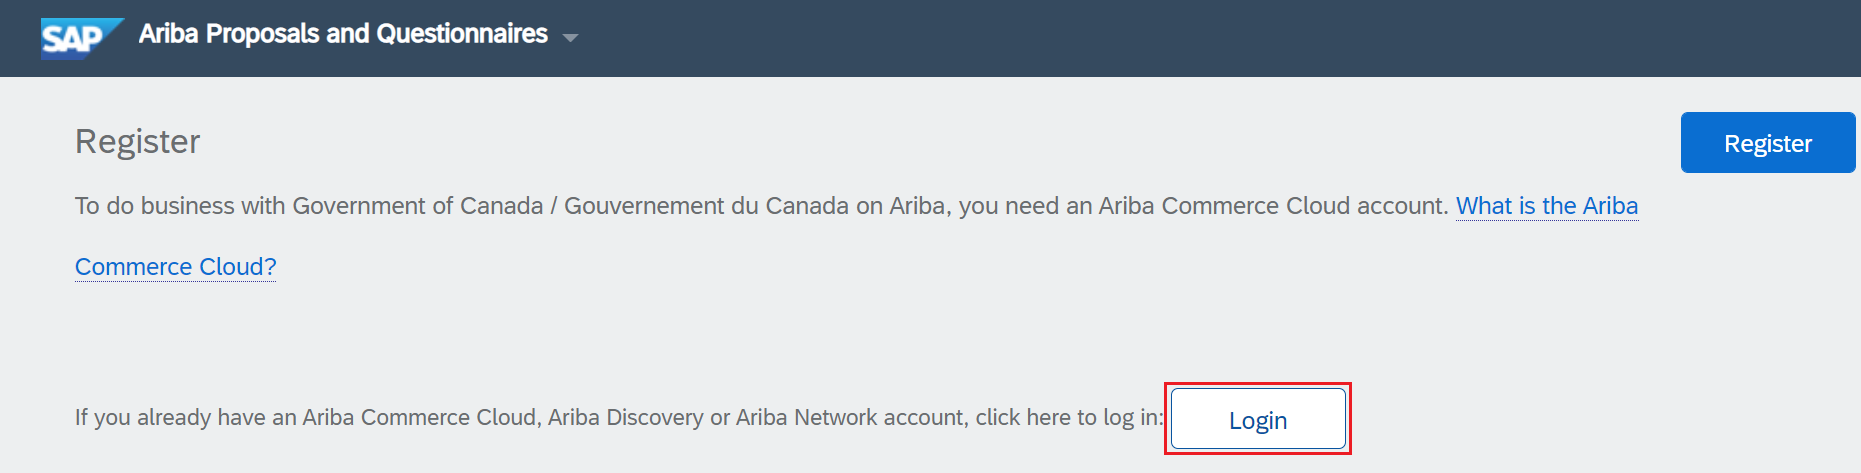 A screenshot of the SAP Ariba Registration page, with the login button highlighted.